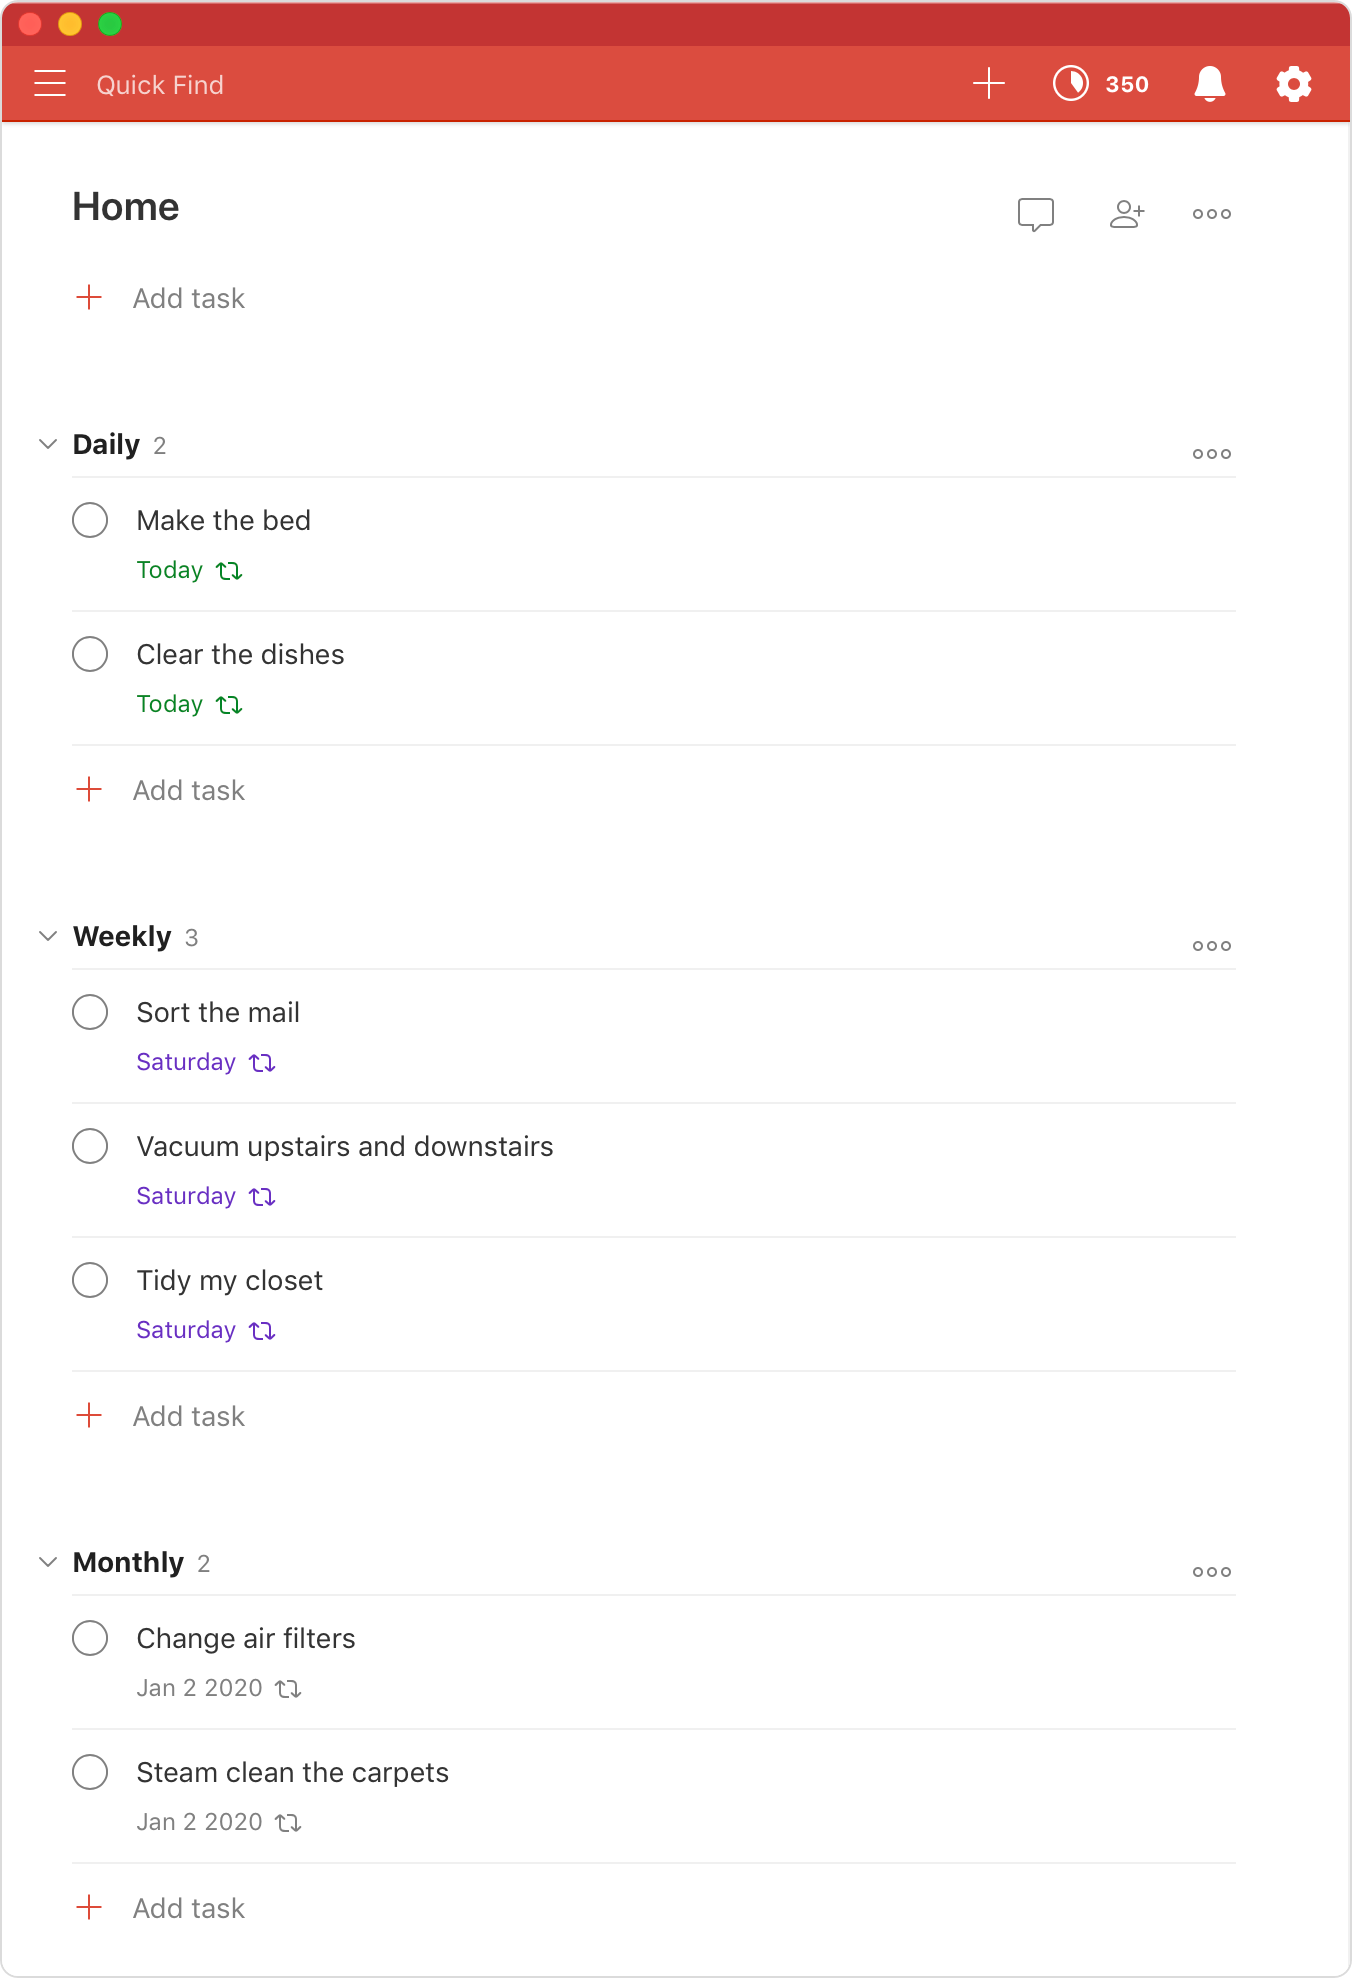 Organize Your Life Set up a Todoist project with “Daily”, “Weekly” and “Monthly” chores